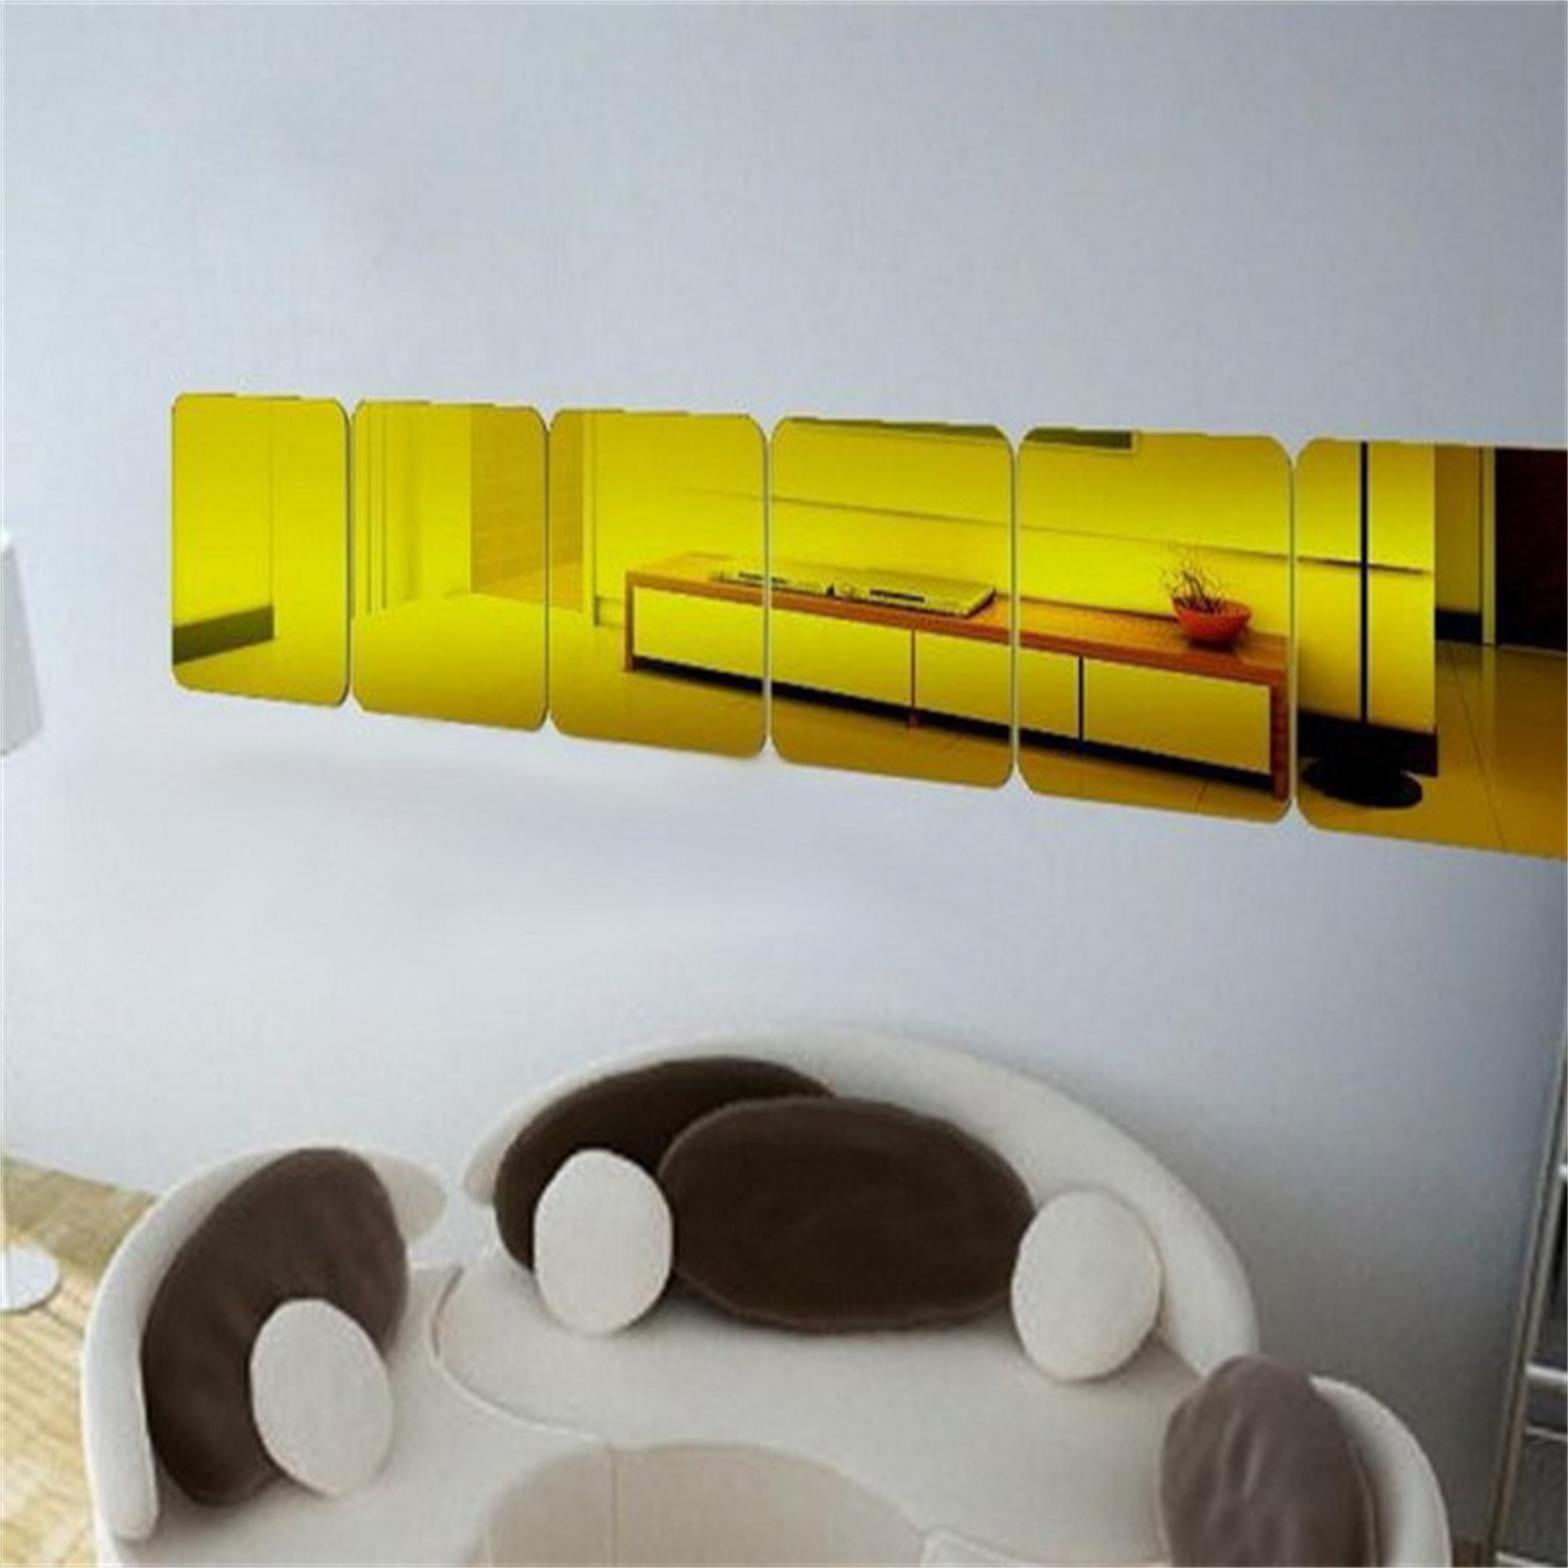 Clearance! EQWLJWE 6PCS Flexible Mirror Sheets Self Adhesive Square Non  Glass Mirror Tiles Mirror Stickers for Home Wall Decor 